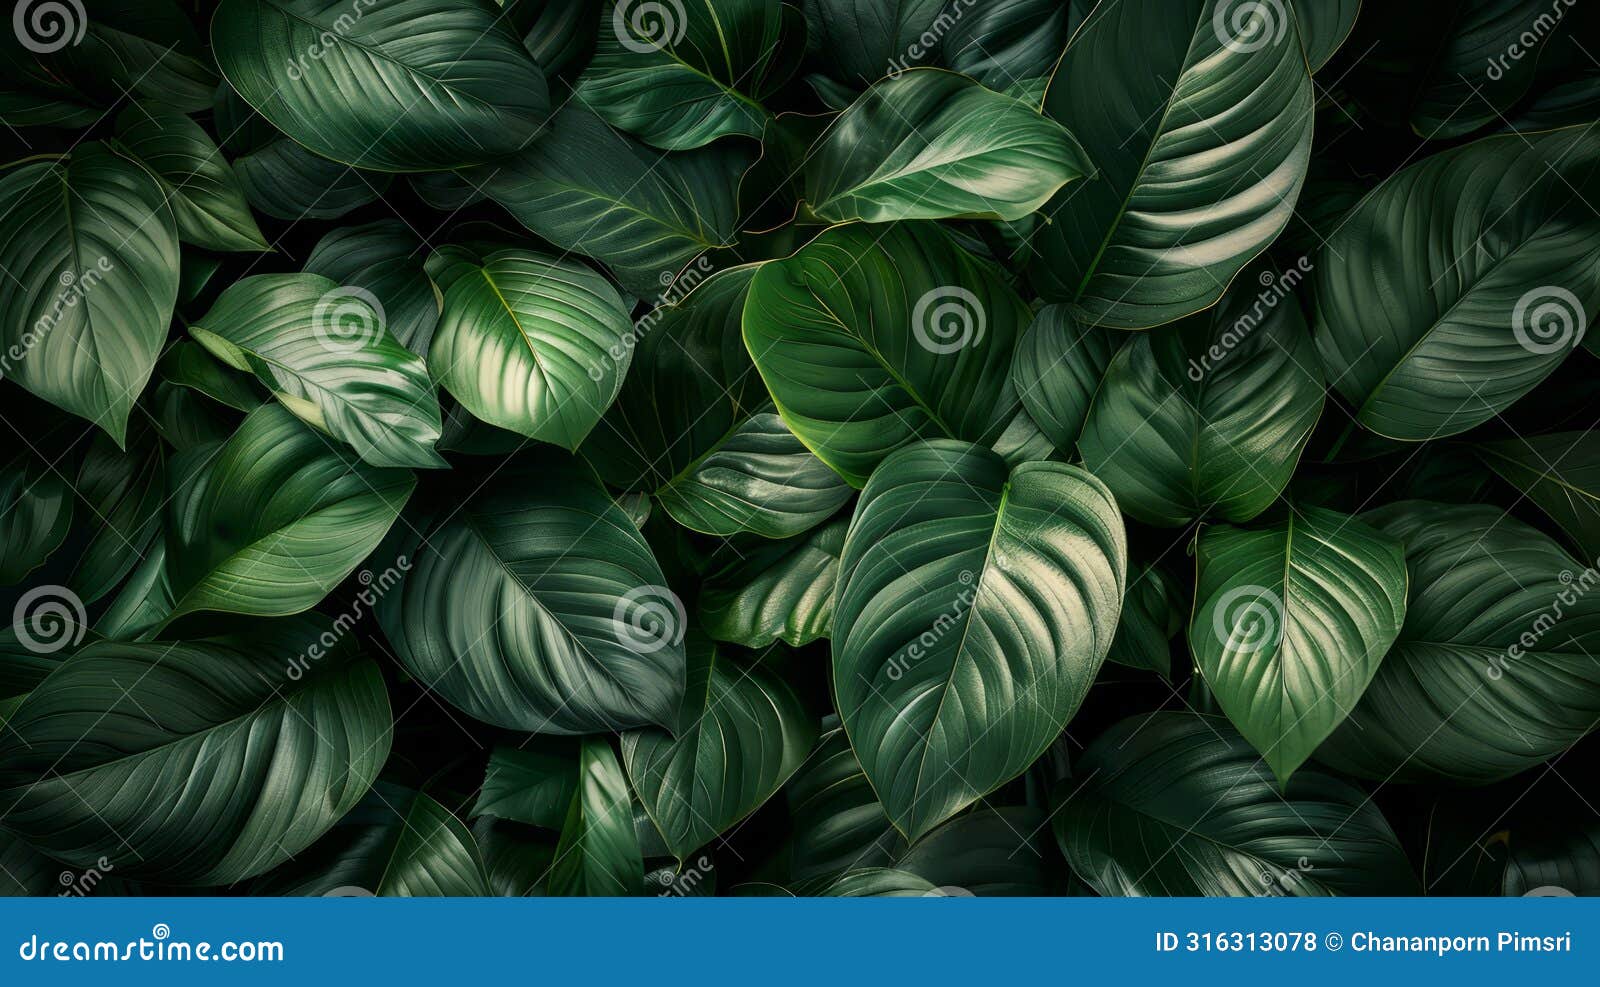 dark green leaves with a velvety texture